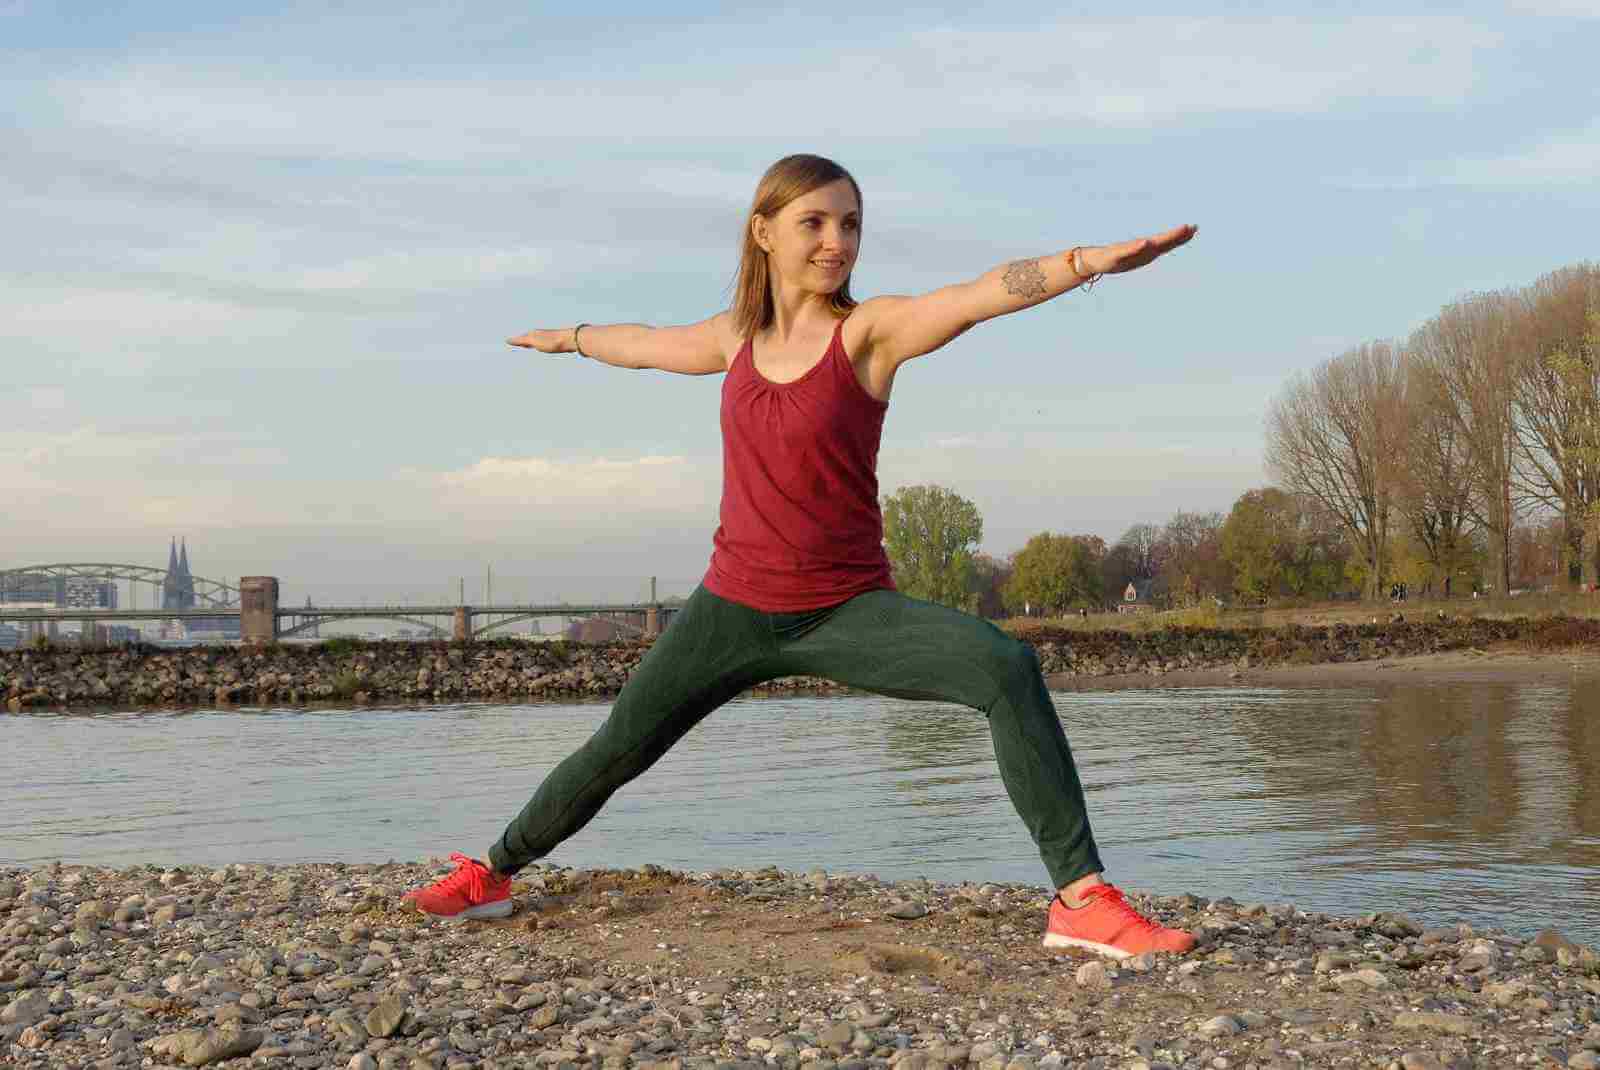 Interview with Yogini and change management consultant Anna-Lena Gehrmann from Cologne, Germany